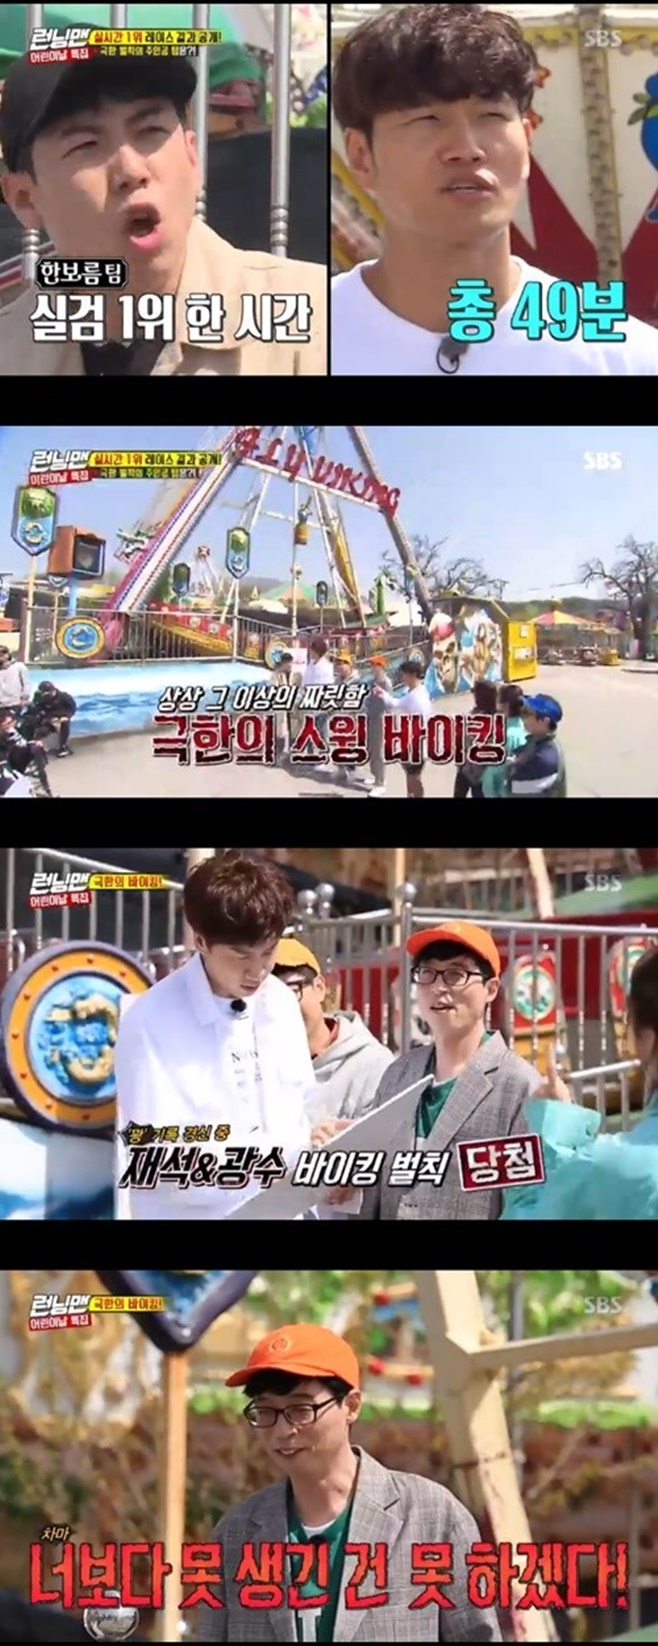 In Running Man, Yoo Jae-Suk showed a strong comparison with Yang Se-chan.On the afternoon of the 5th, SBS entertainment program Running Man was announced the results of Silmon Race broadcast last week.The crew told Running Man members, Han Bo-reum and Kim Hye-yoon teams have achieved the top spot in real-time search.Especially, Kim Hye-yoon  and Running Man Kim Hye-yoon came in first place.But when time was taken, Han Bo-reum won the final with 49 minutes and Kim Hye-yoon 29 minutes.That left Yang Se-chan and Kim Jong-guk out of the Vikings penalty.The remaining three teams set up Viking riders through a ladder-riding game.The two men were penalized, with Yoo Jae-Suk and Lee Kwang-soo drawing ladders for Kim Hye-yoons team, who unfortunately finished second.Ji Suk-jin, who watched them, said, You can not ride, he said. Because the precaution is that it is said to be ban on ugly planes. Lee Kwang-soo denied, I am not, and the members told Yoo Jae-Suk, If you admit that you are ugly than Yang Se-chan, I will exclude you from penalties.Yoo Jae-Suk, who was worried, said, I can not stand anything ugly than Yang Se-chan.